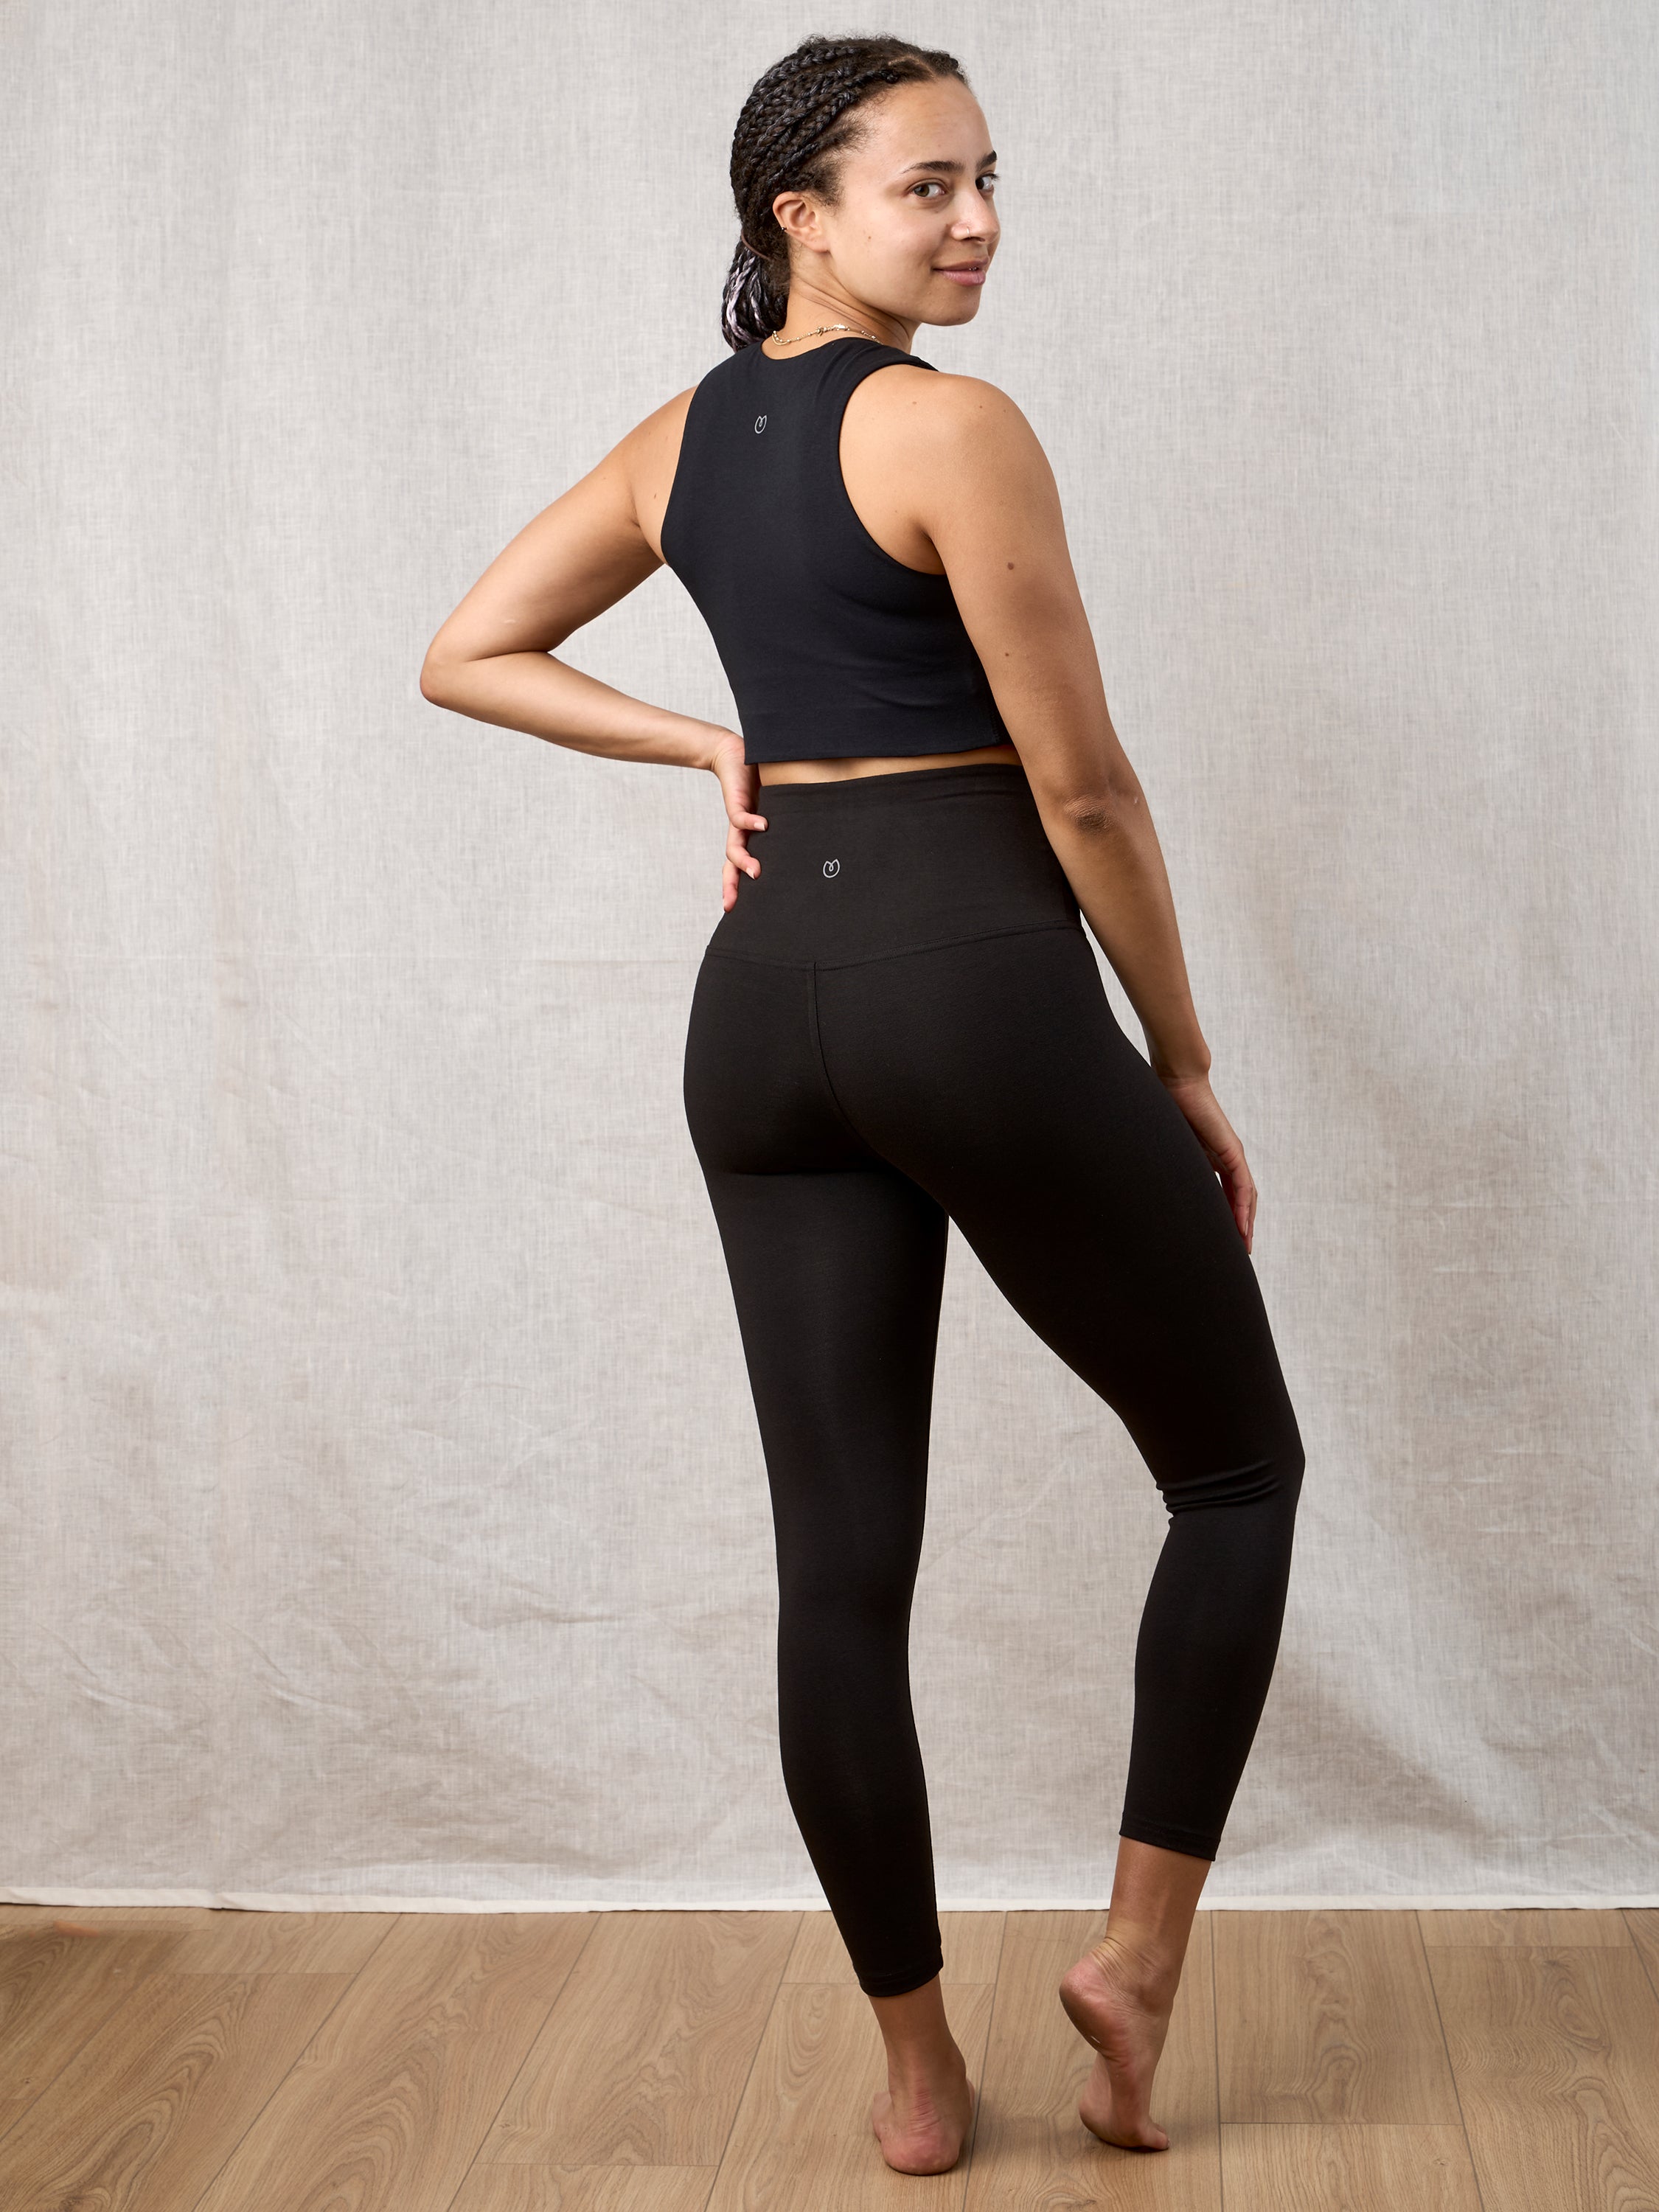 ladies yoga clothing Cheap Sell - OFF 66%